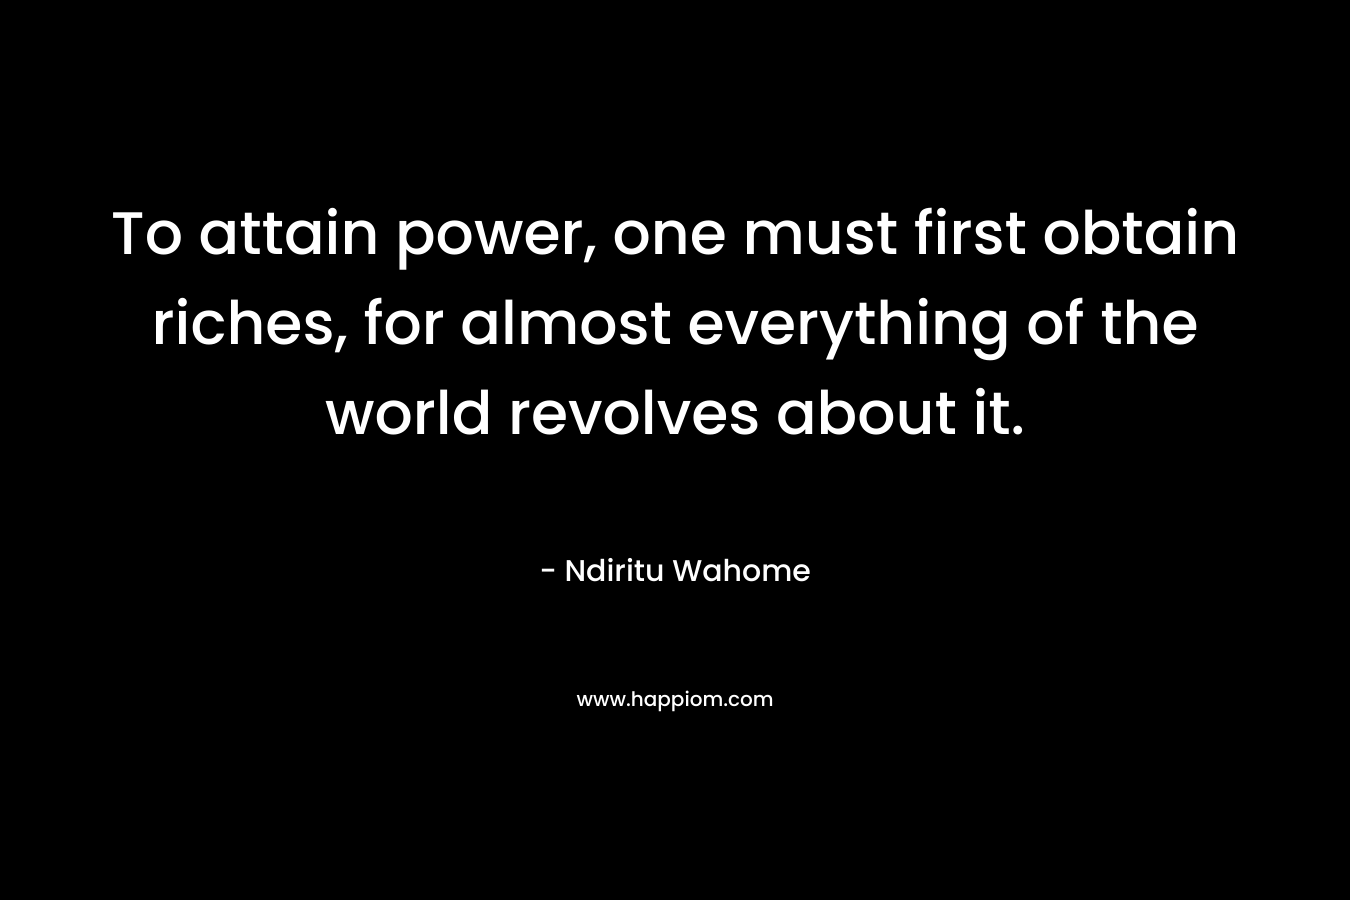 To attain power, one must first obtain riches, for almost everything of the world revolves about it. – Ndiritu Wahome